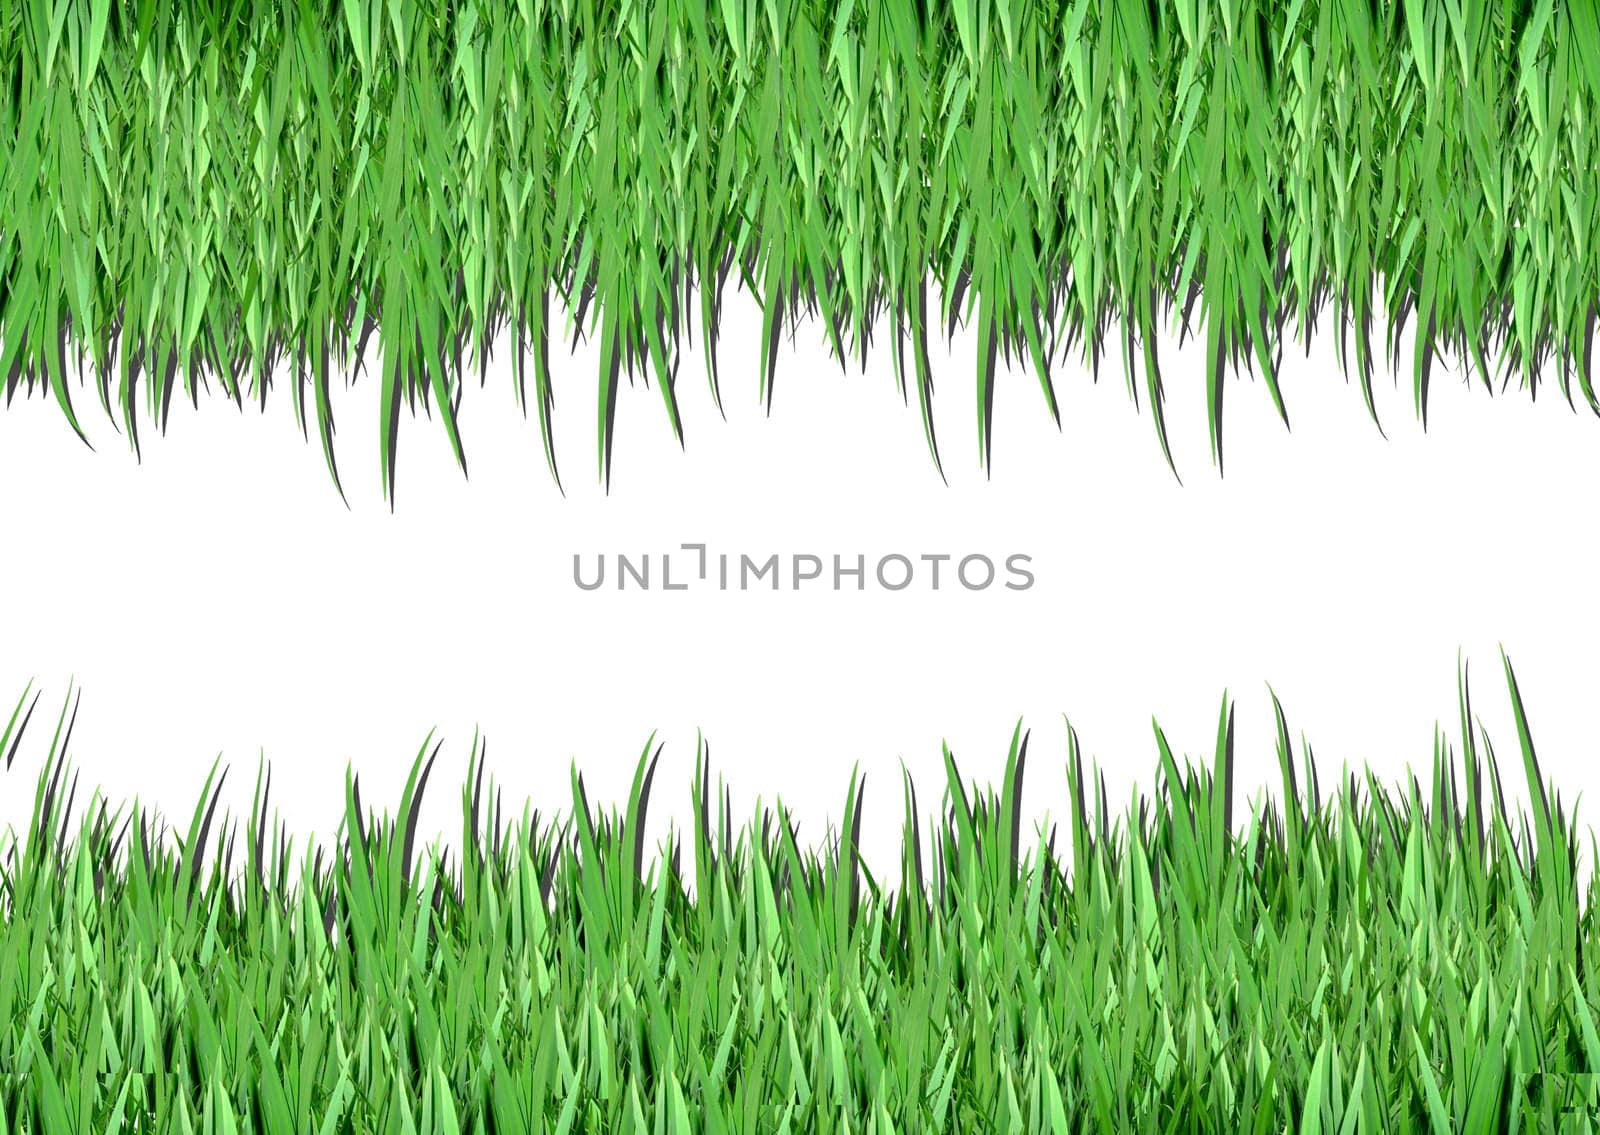 Over view of grass on white background 
 by rufous